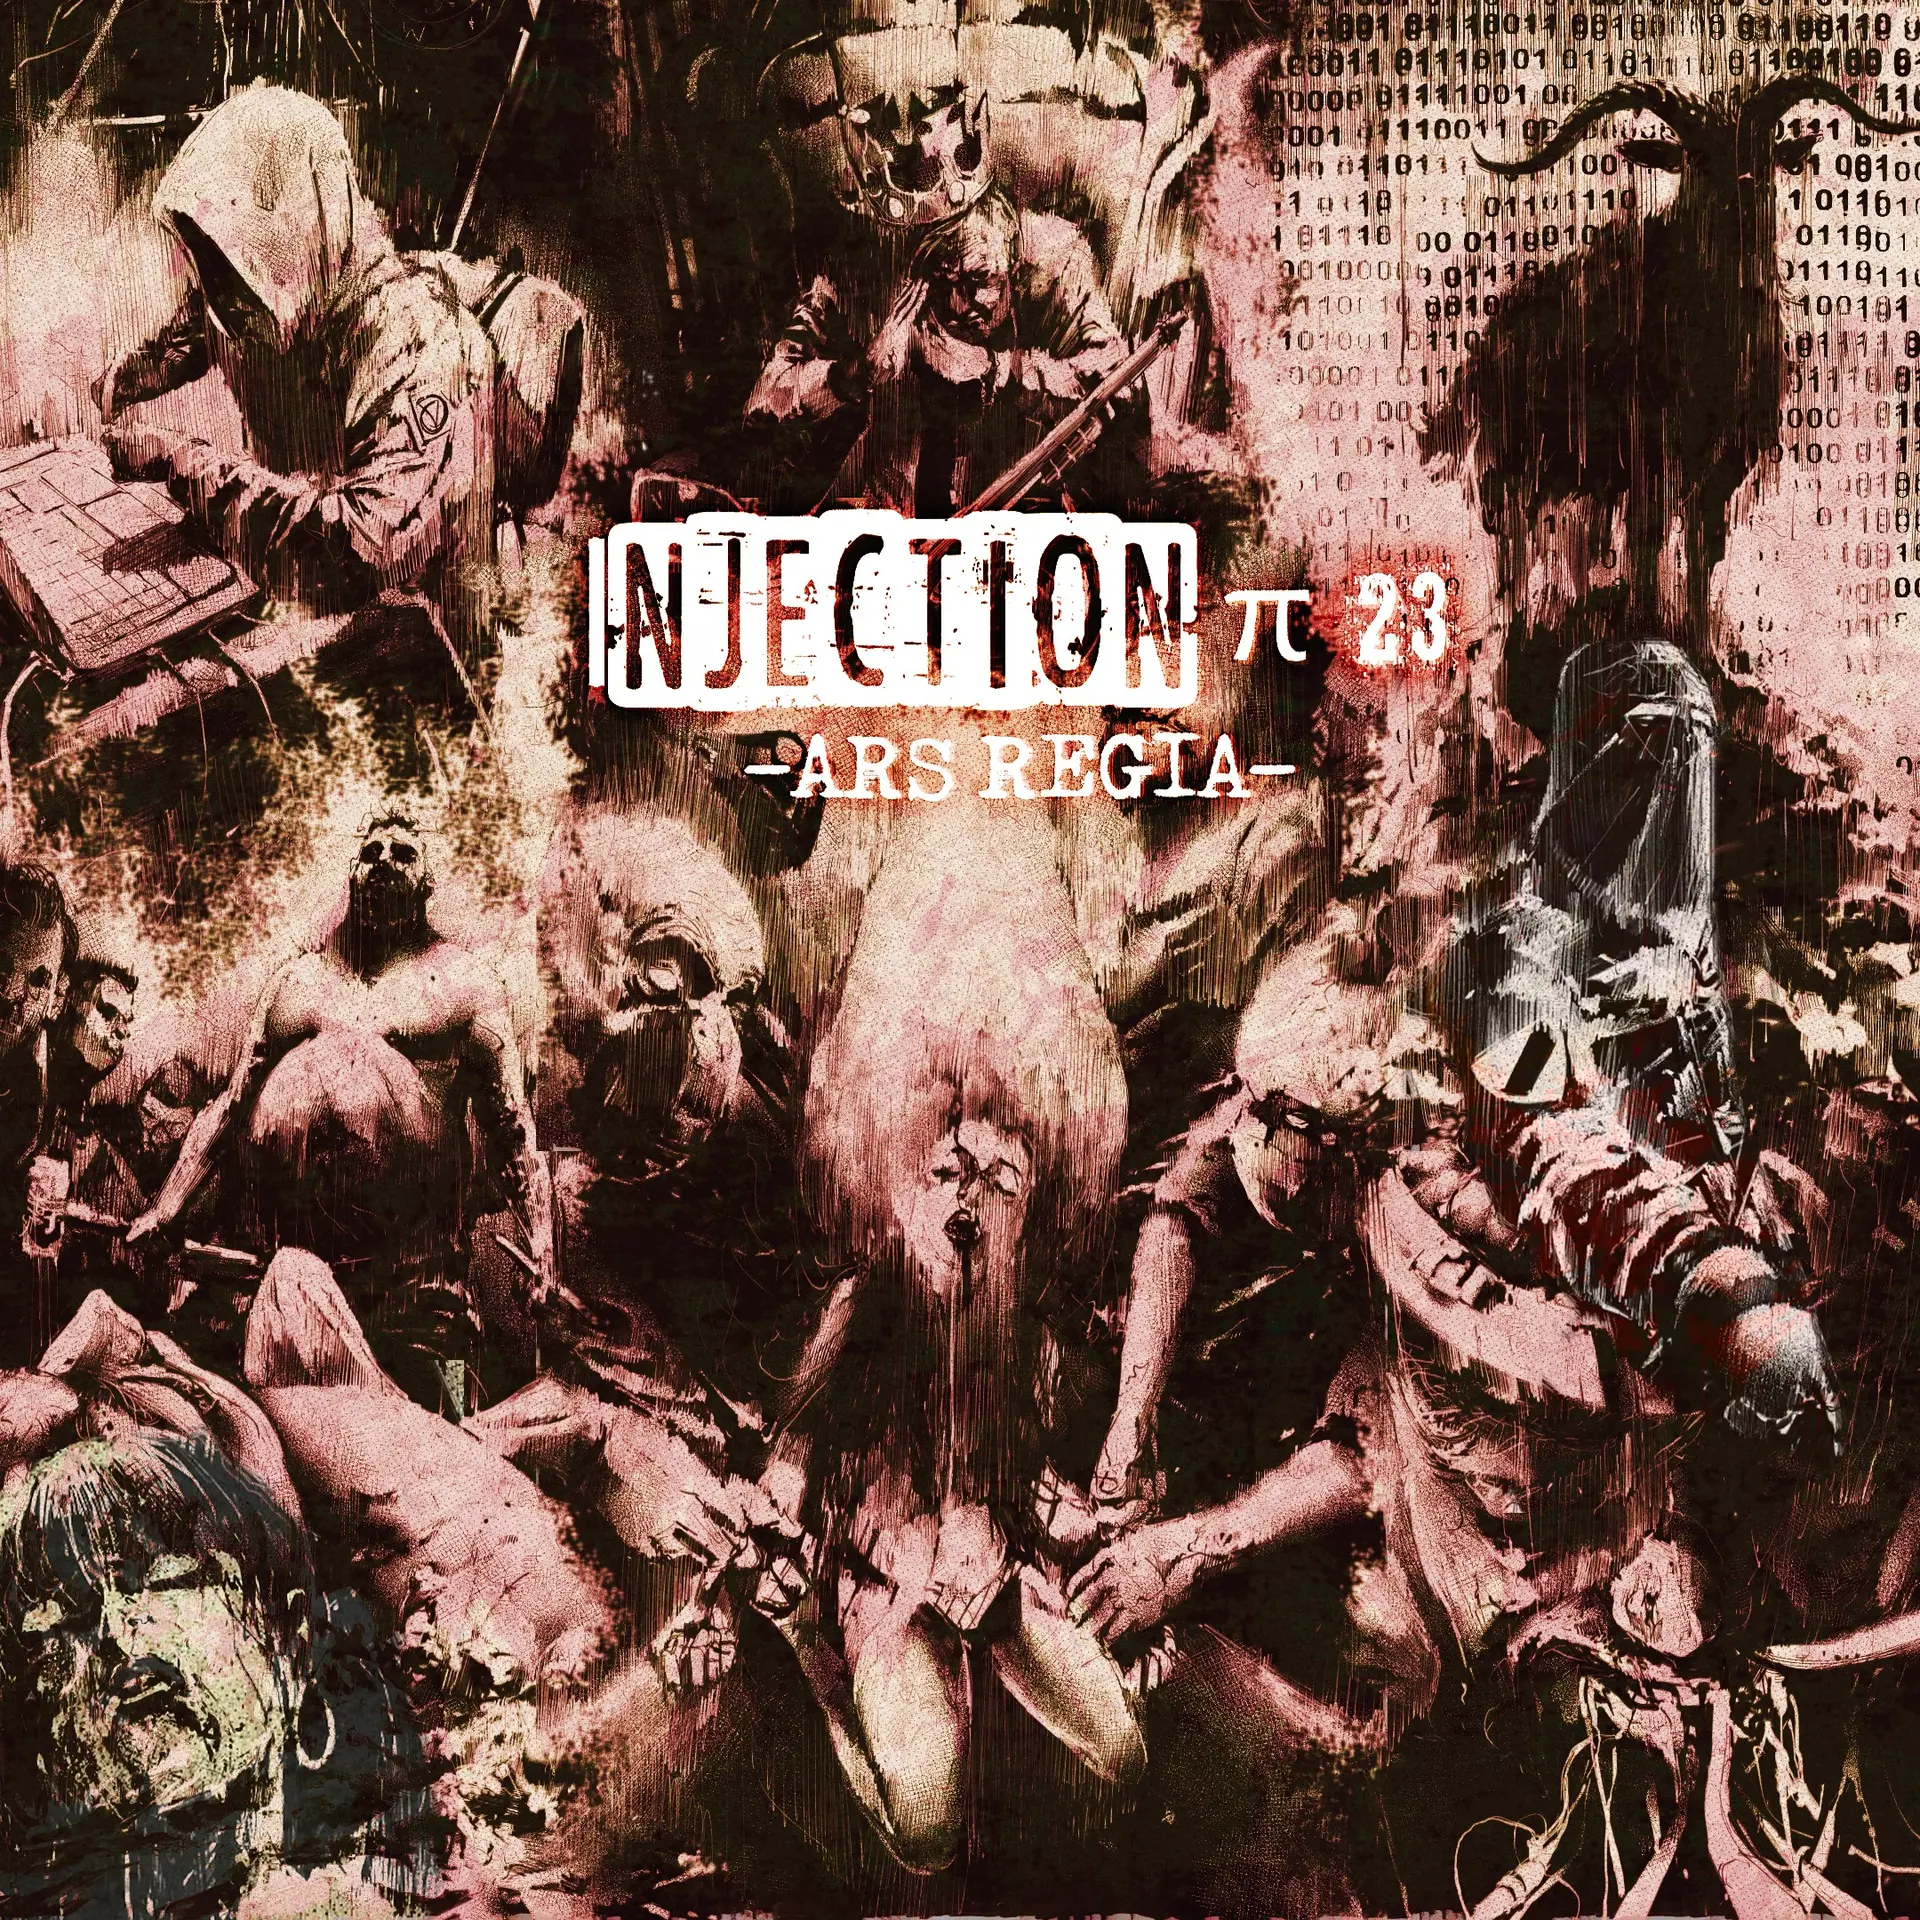 Injection π23 'Ars regia' (Xbox Games BR)